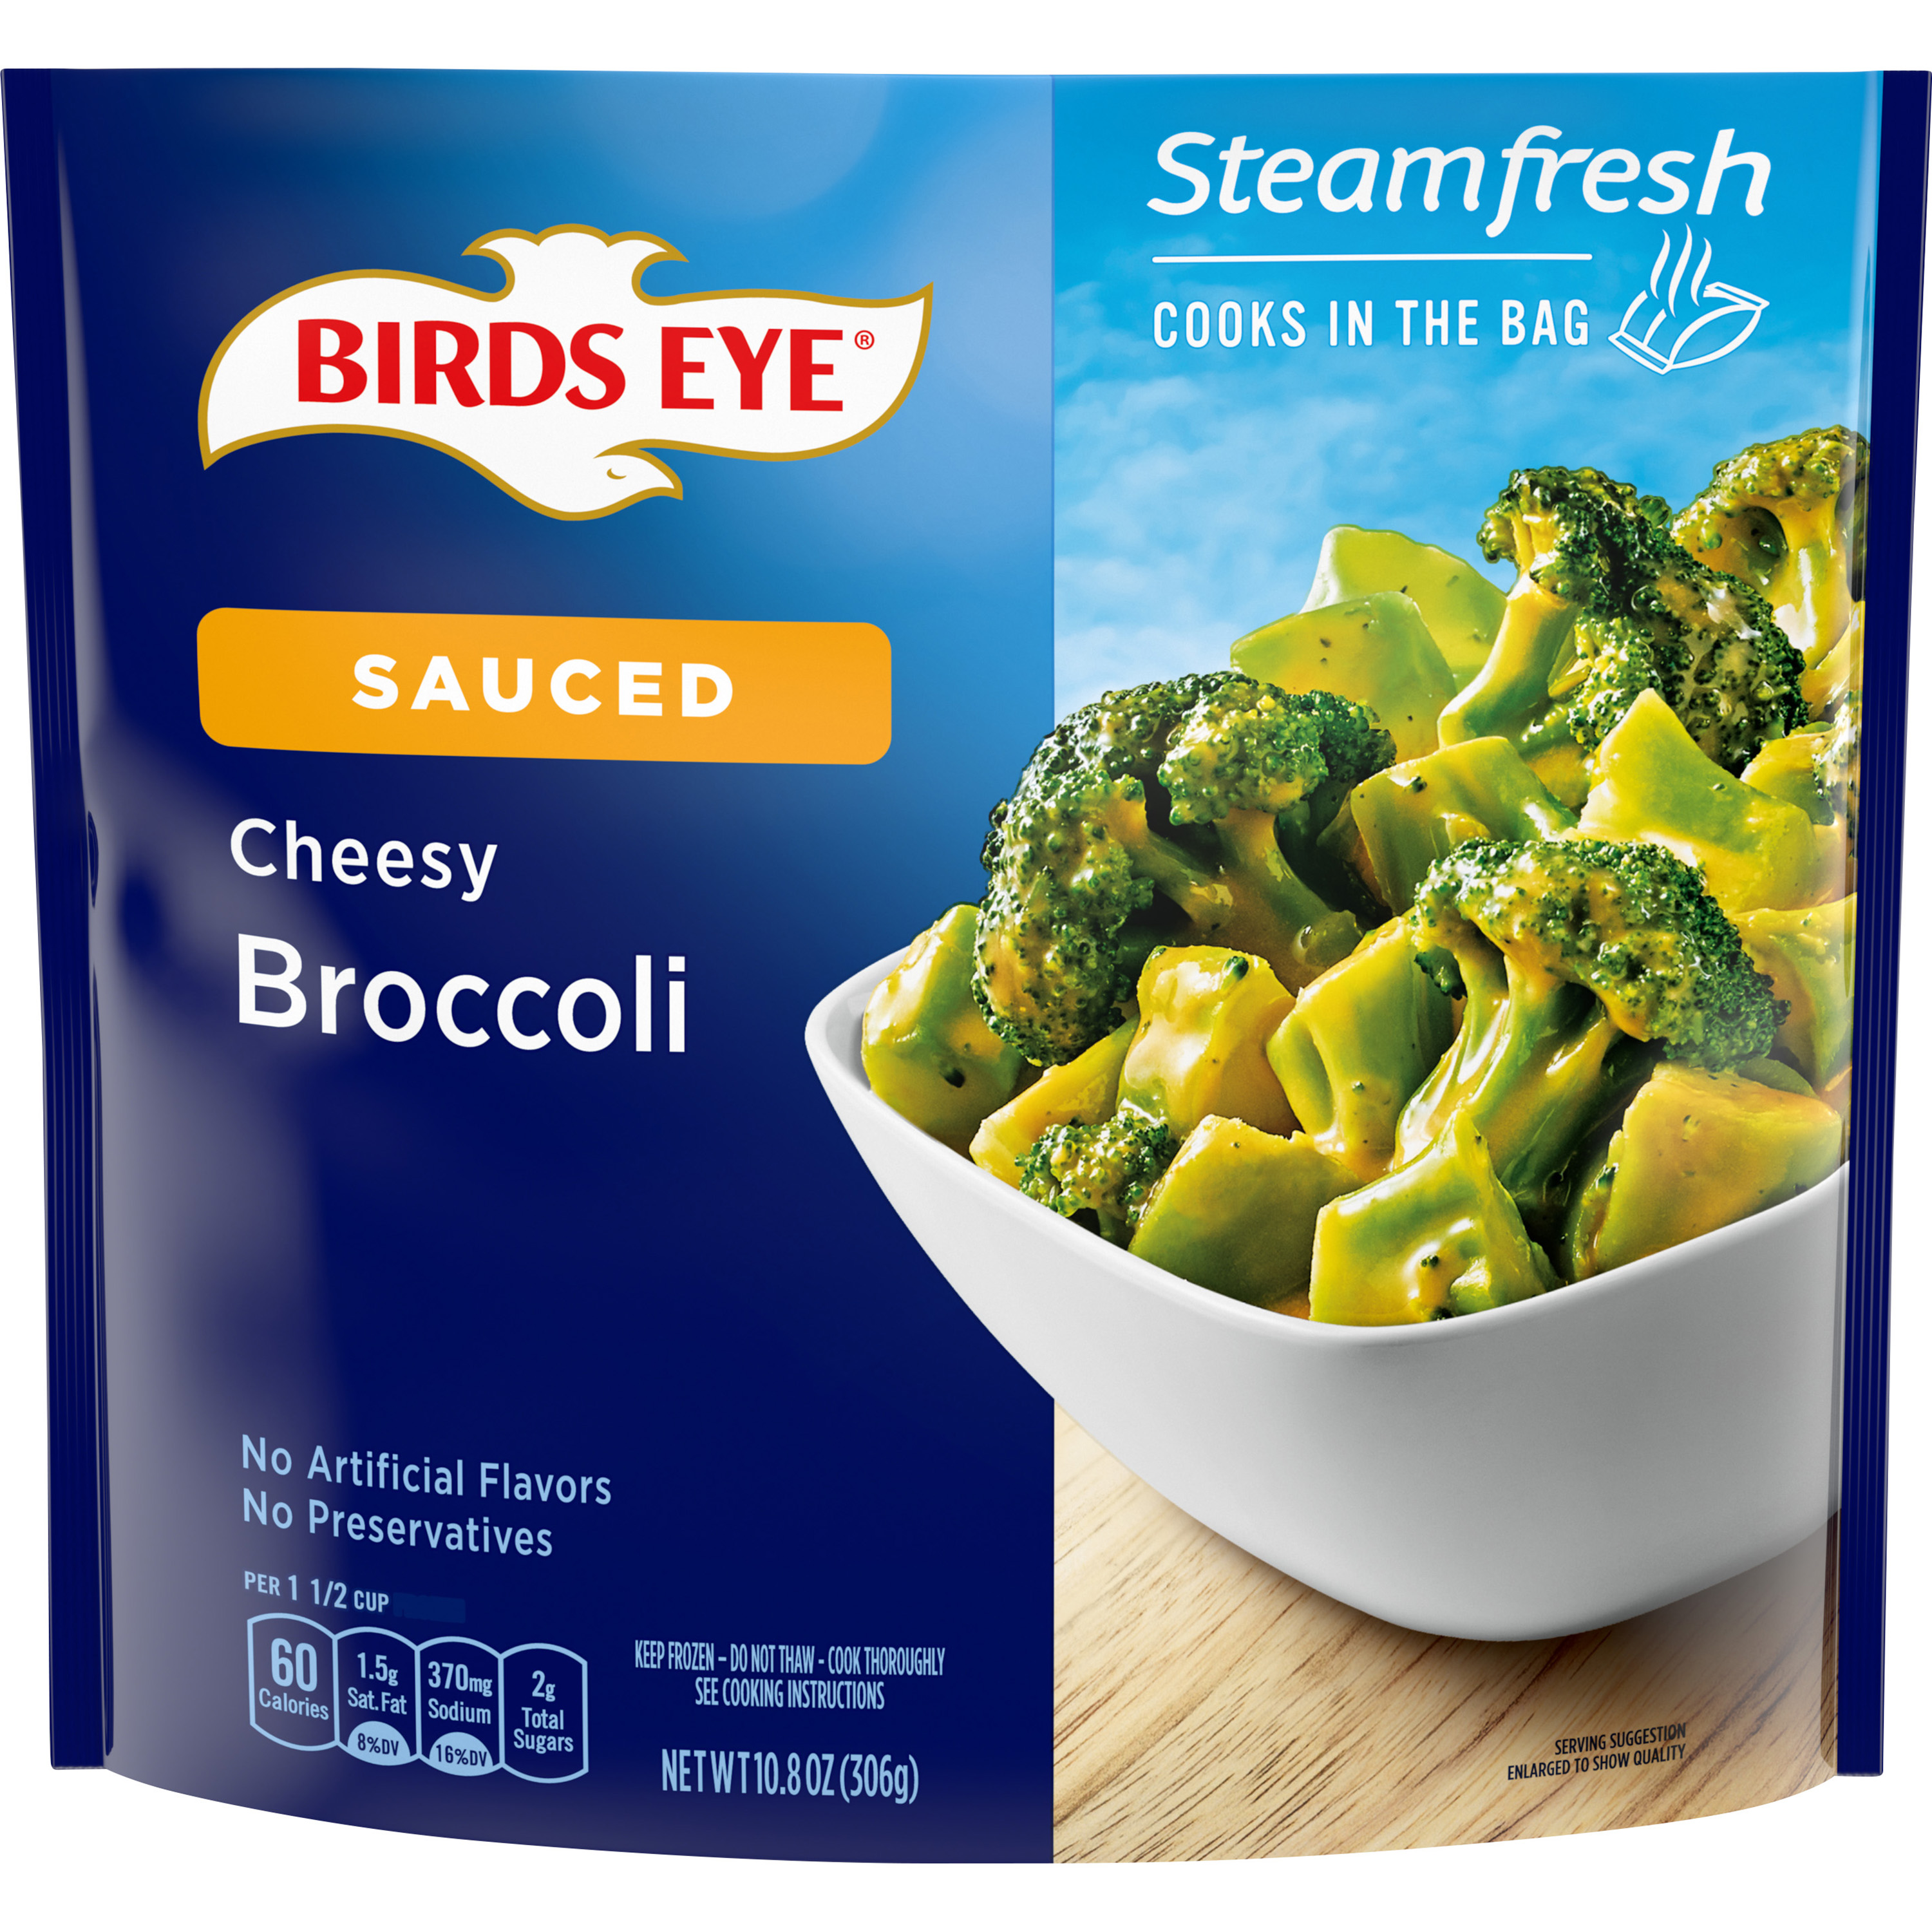 Birds Eye Steamfresh Chef’s Favorites Sauced Broccoli with Cheese Sauce